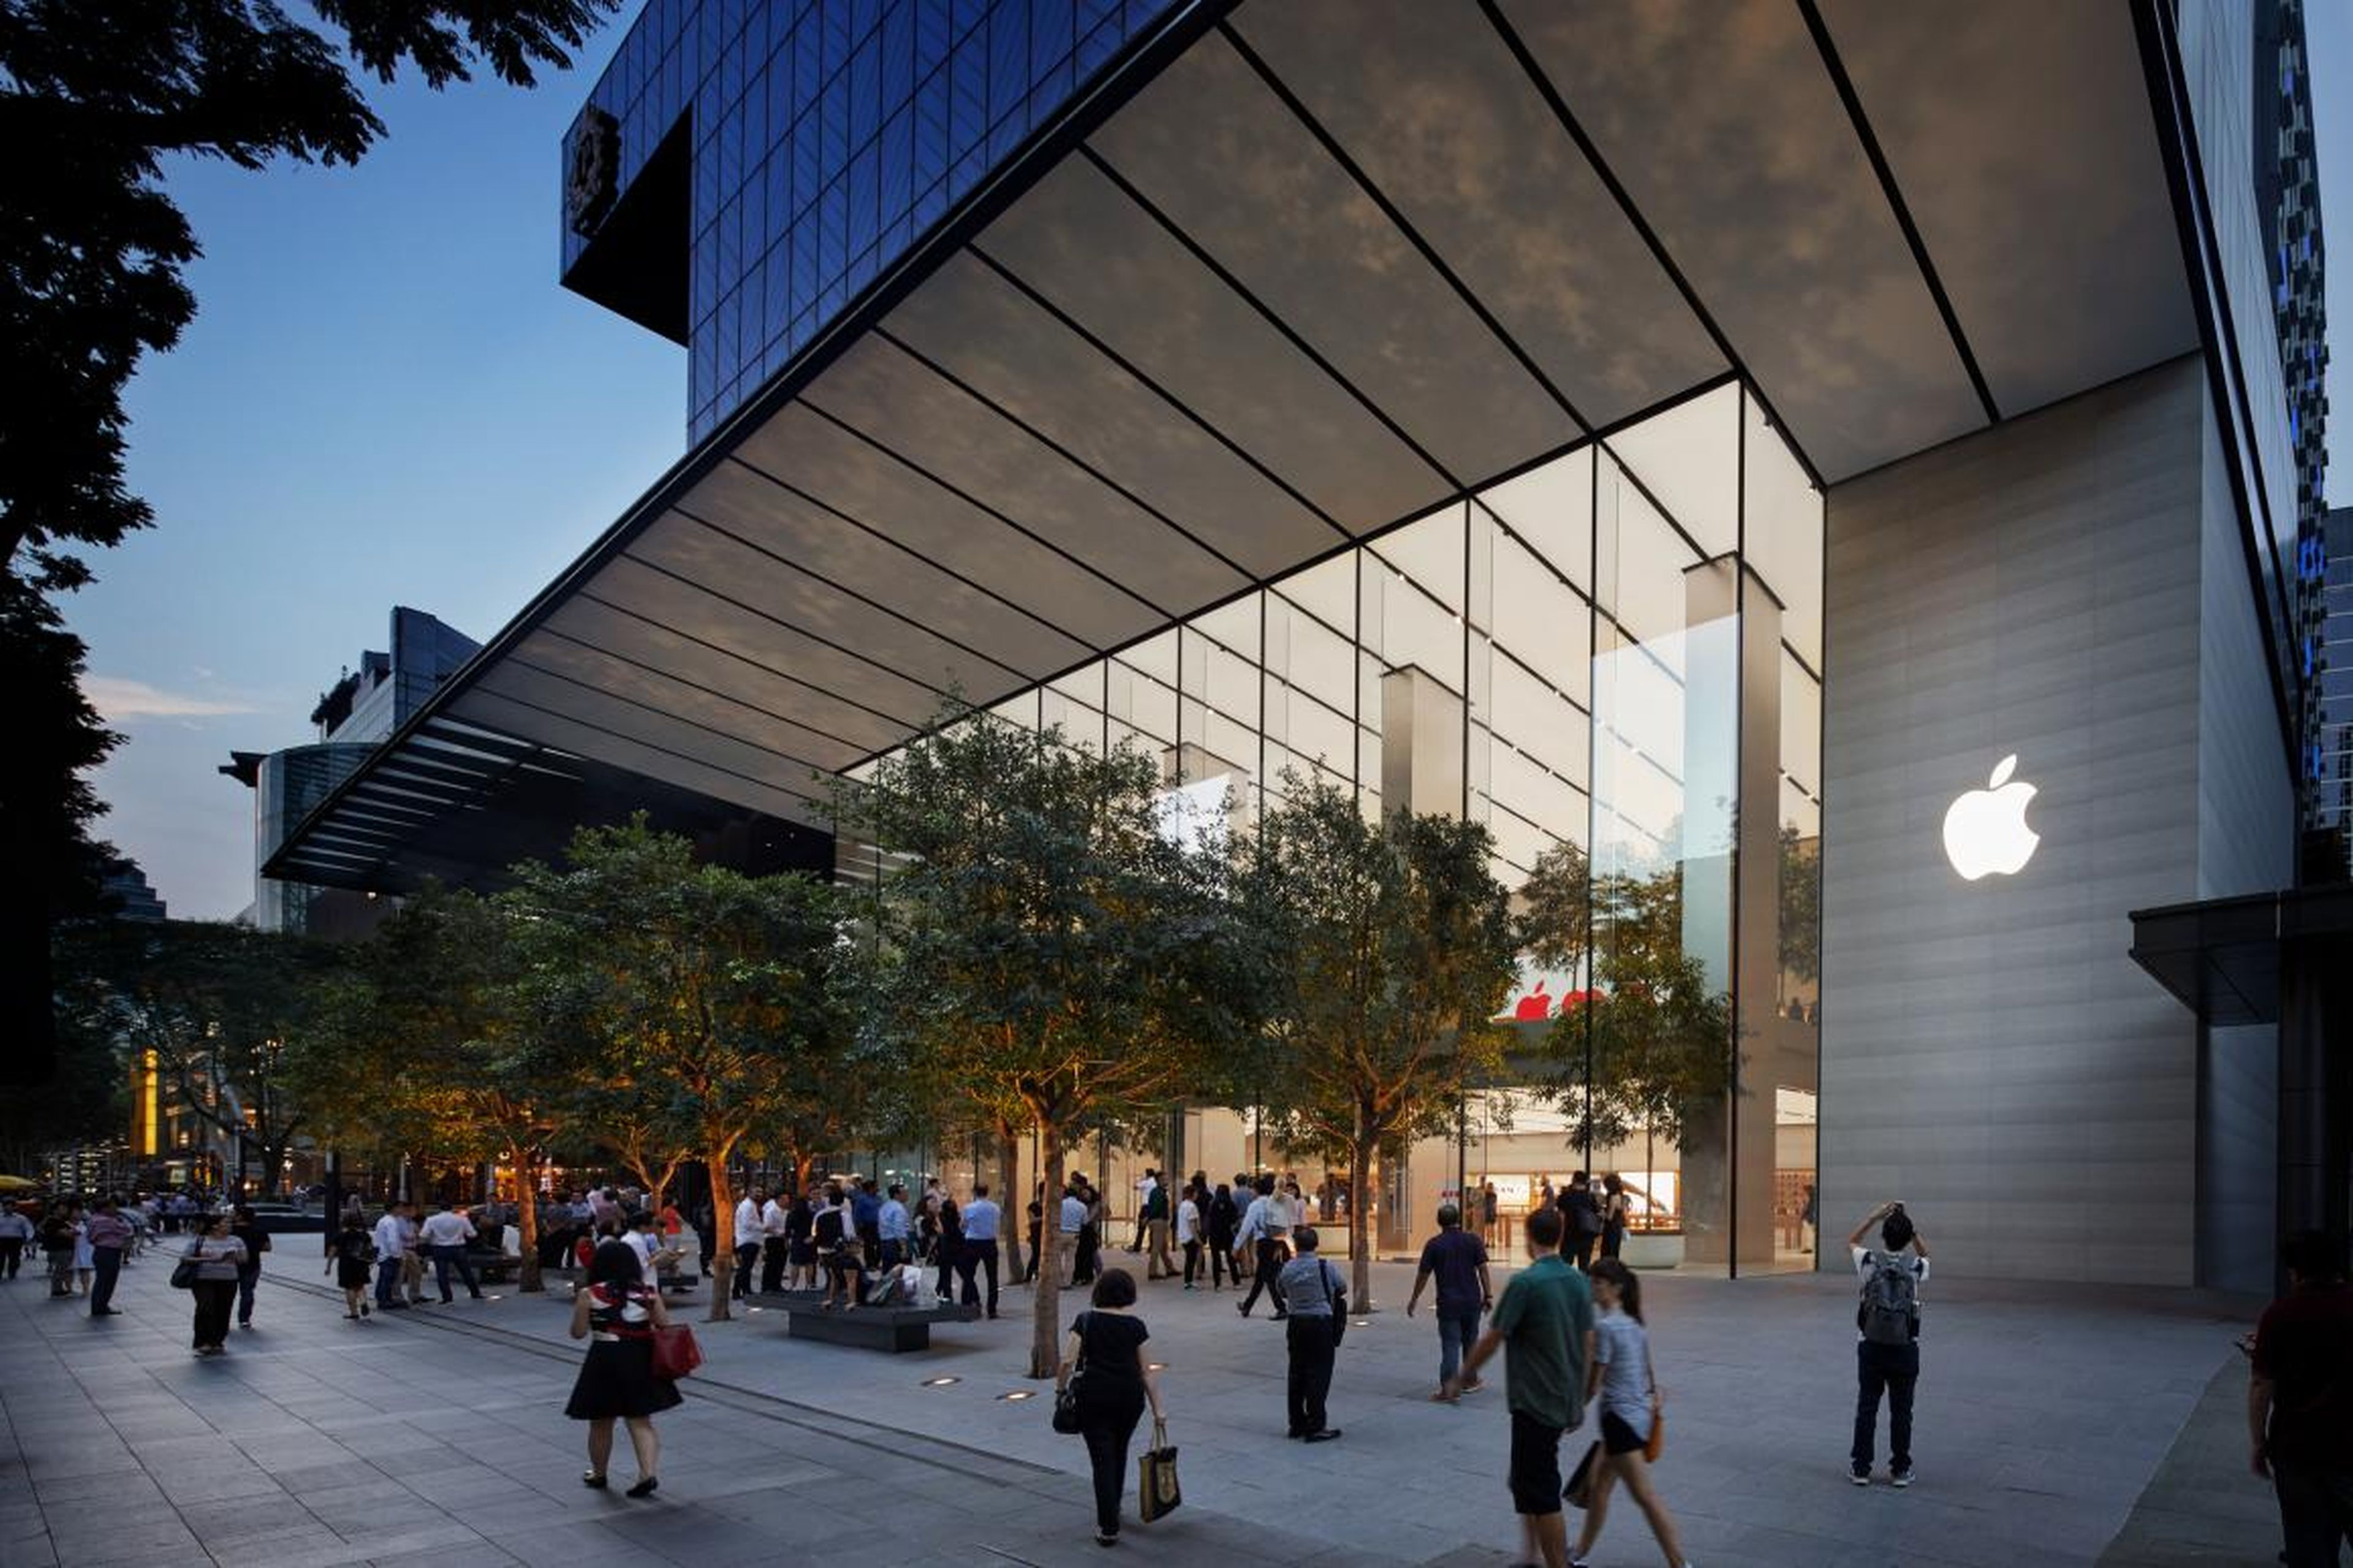 Apple's first store in Southeast Asia opened in Singapore in early 2017. The 120-foot glass facade blurs inside and out, and 16 trees add to the city’s already lush greenery.